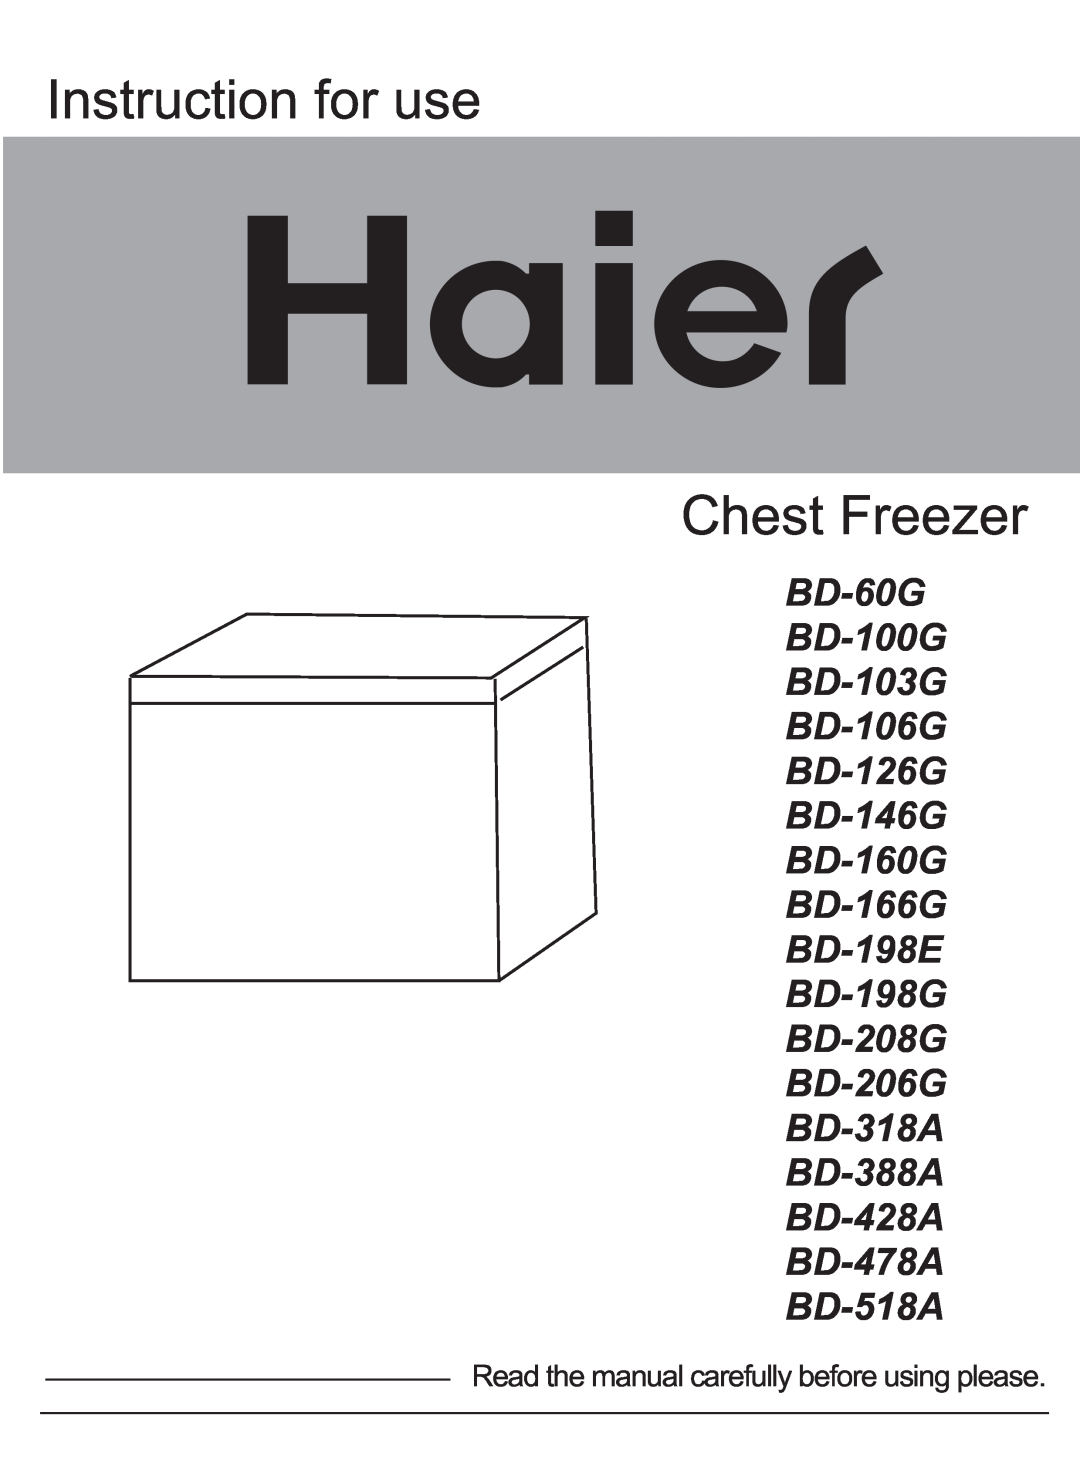 Haier BD-198E manual Instruction for use Chest Freezer, BD-60G BD-100G BD-103G BD-106G BD-126G BD-146G BD-160G BD-166G 